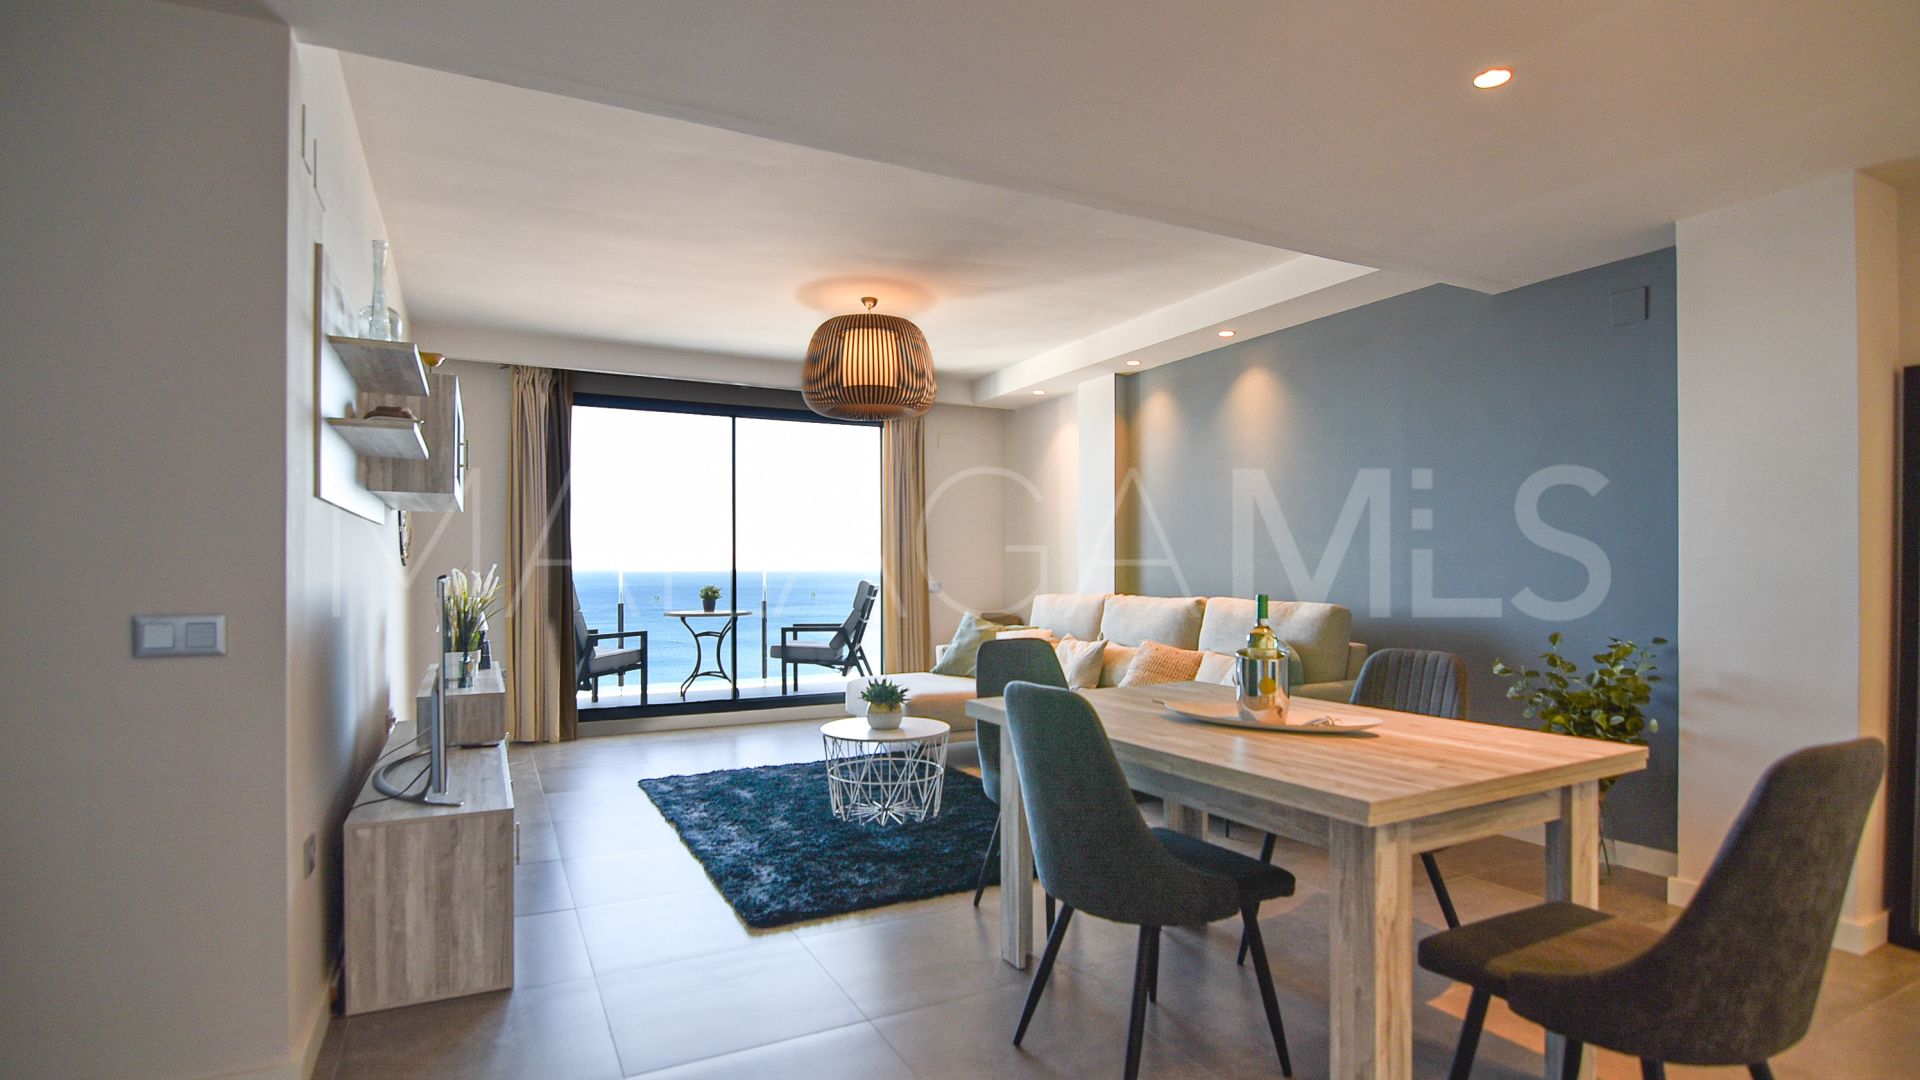 For sale Manilva 2 bedrooms apartment